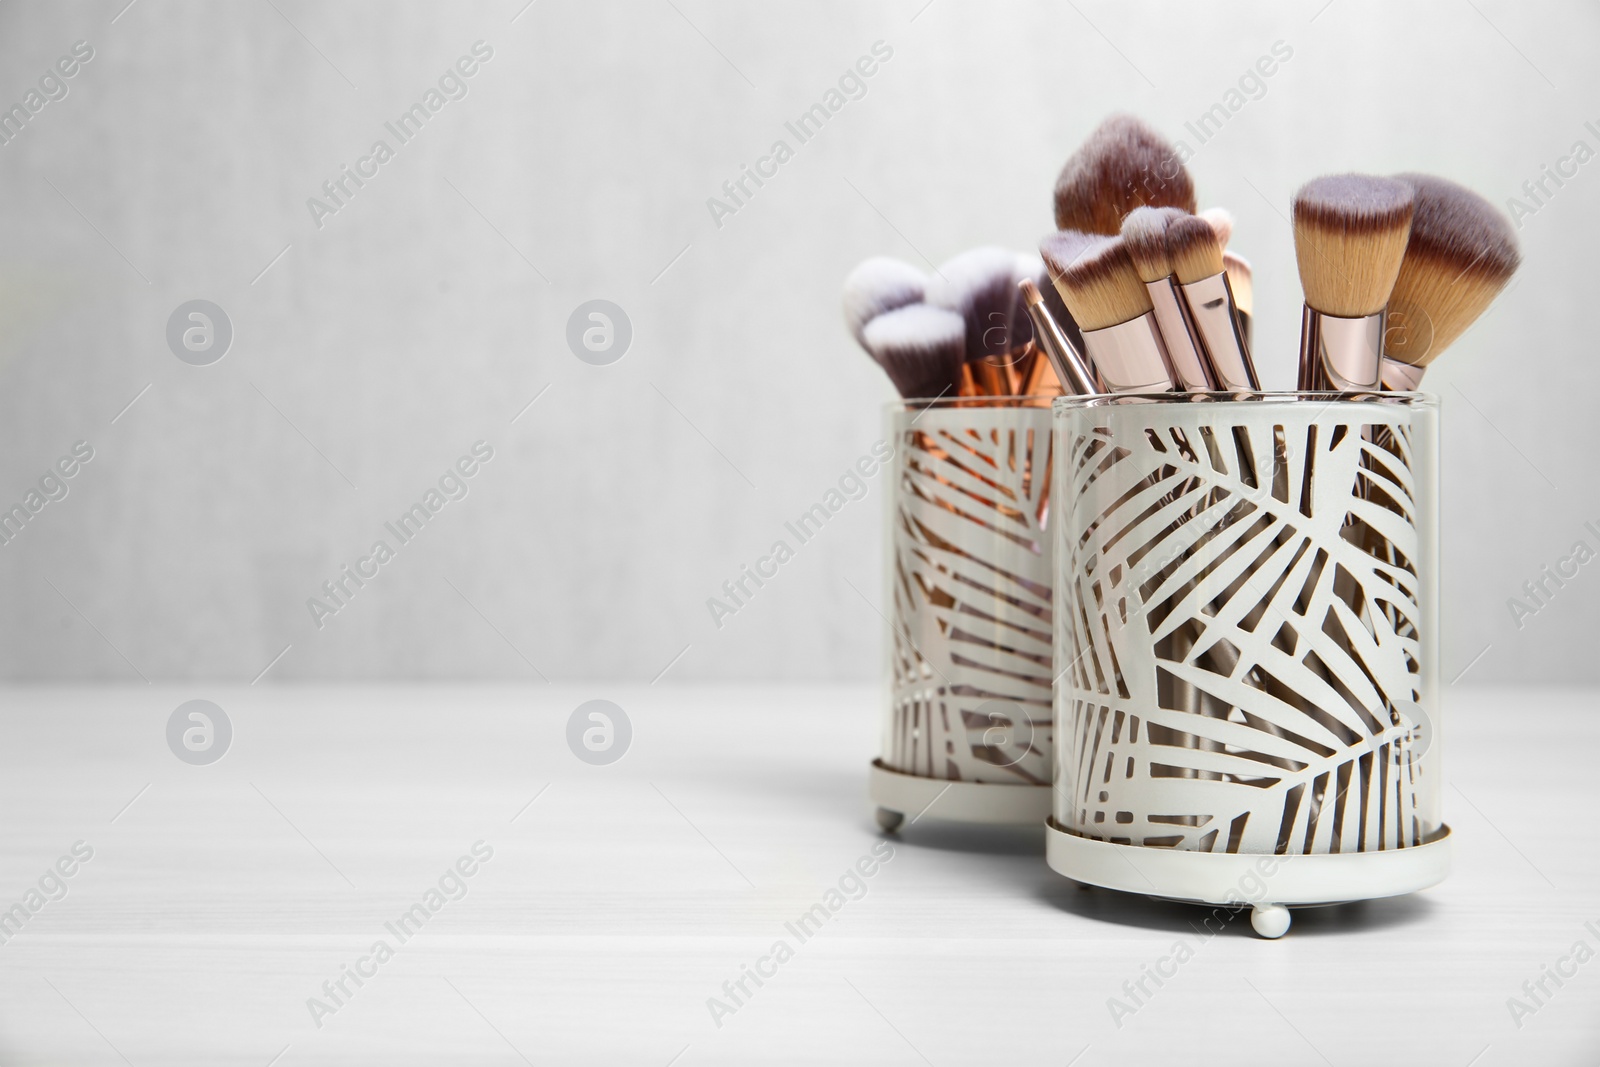 Photo of Organizers with professional makeup brushes on light table. Space for text